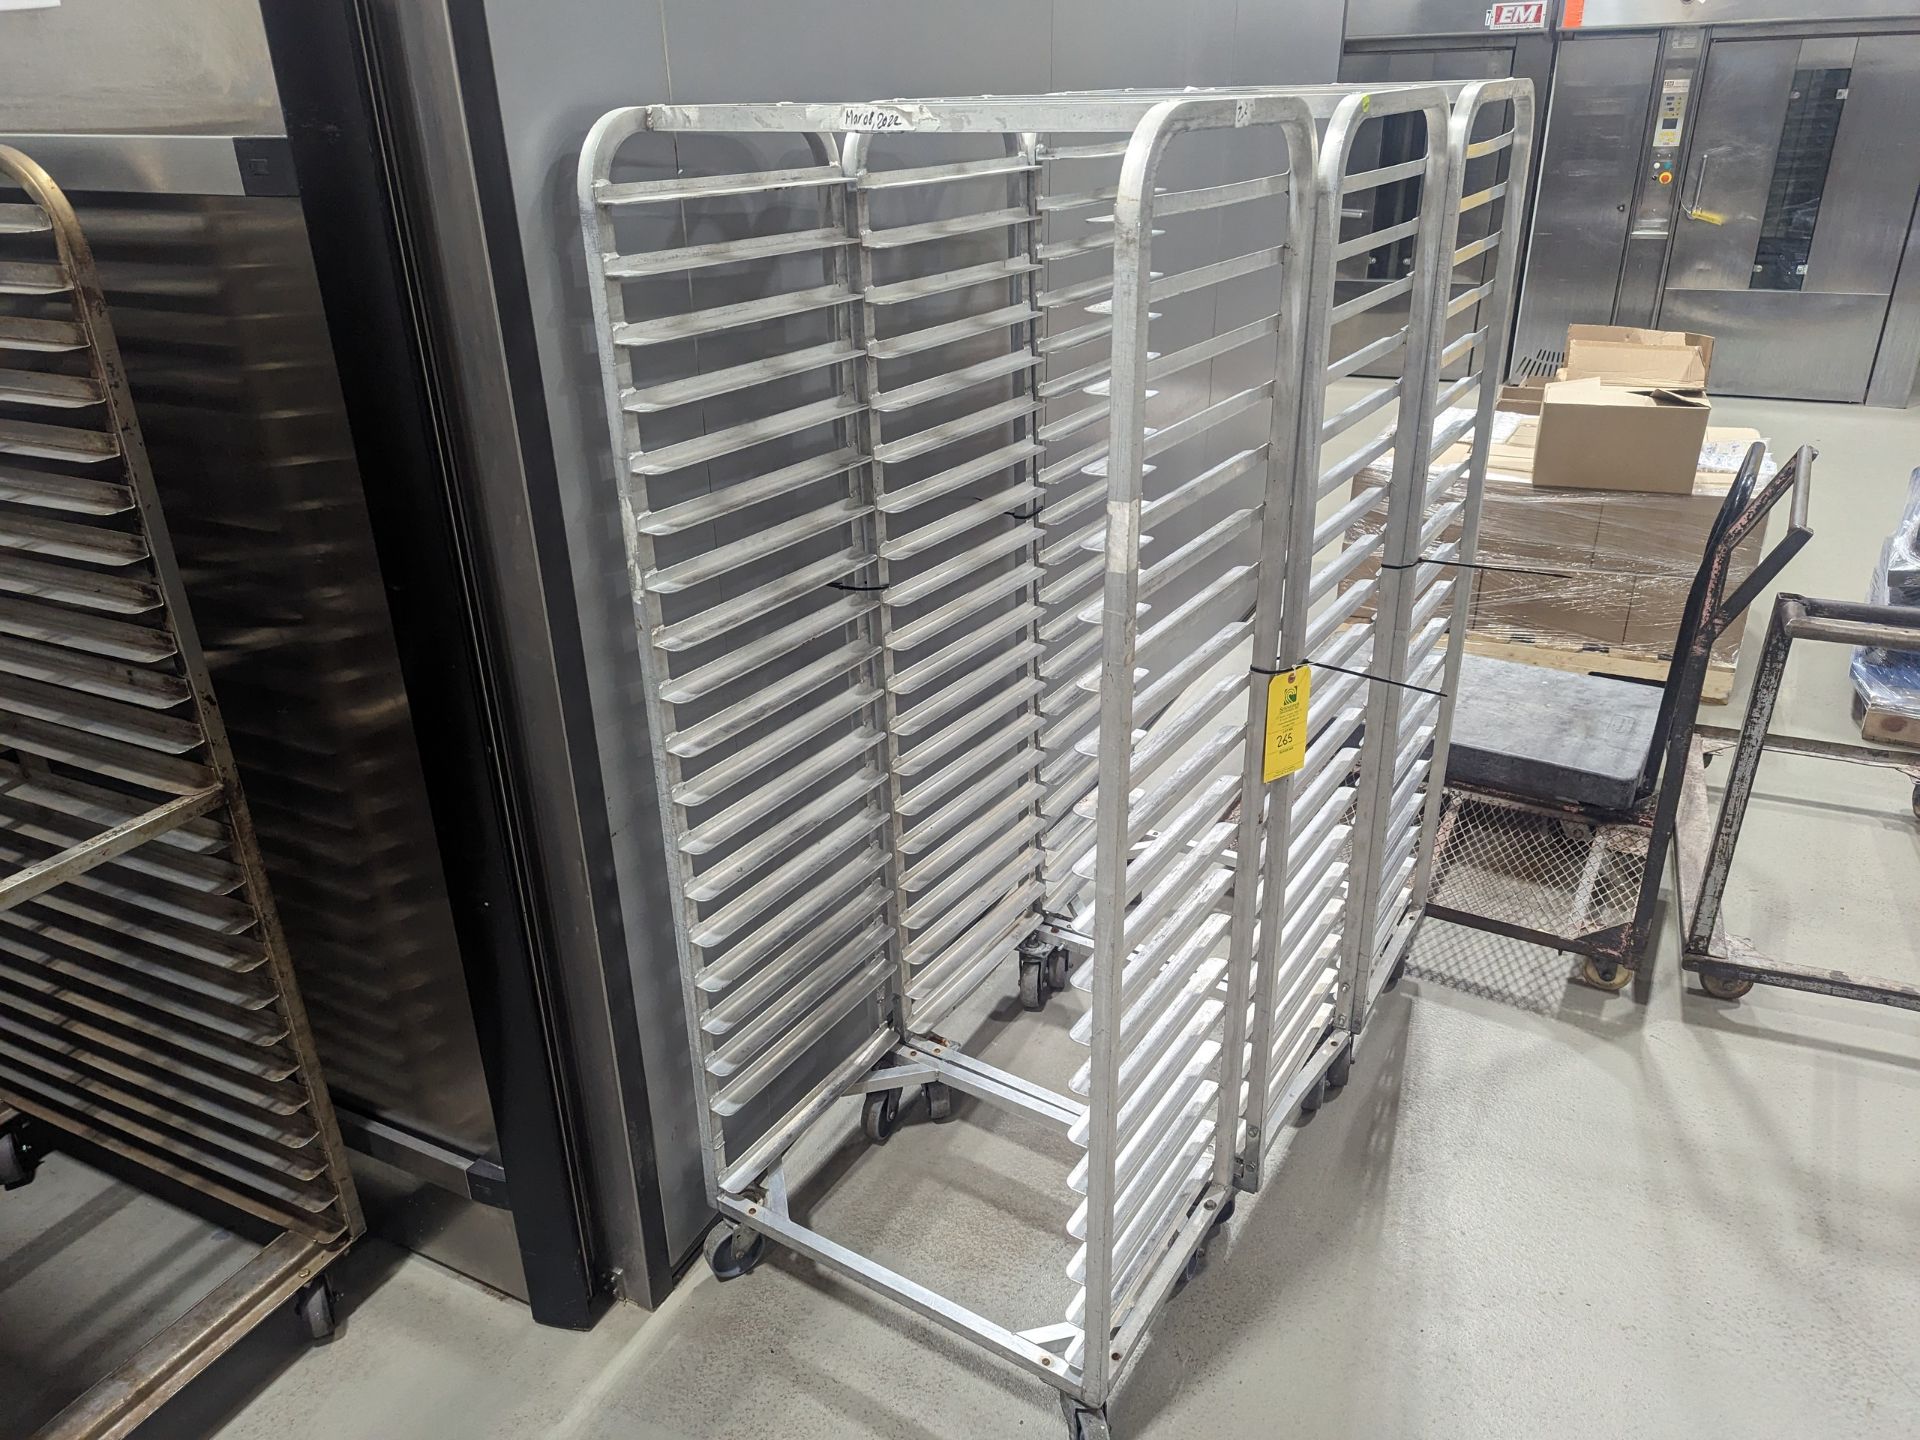 Lot of 3 Aluminum Racks, Dimensions LxWxH: 57x29x69 Measurements are for lot of 3 together - Image 2 of 4